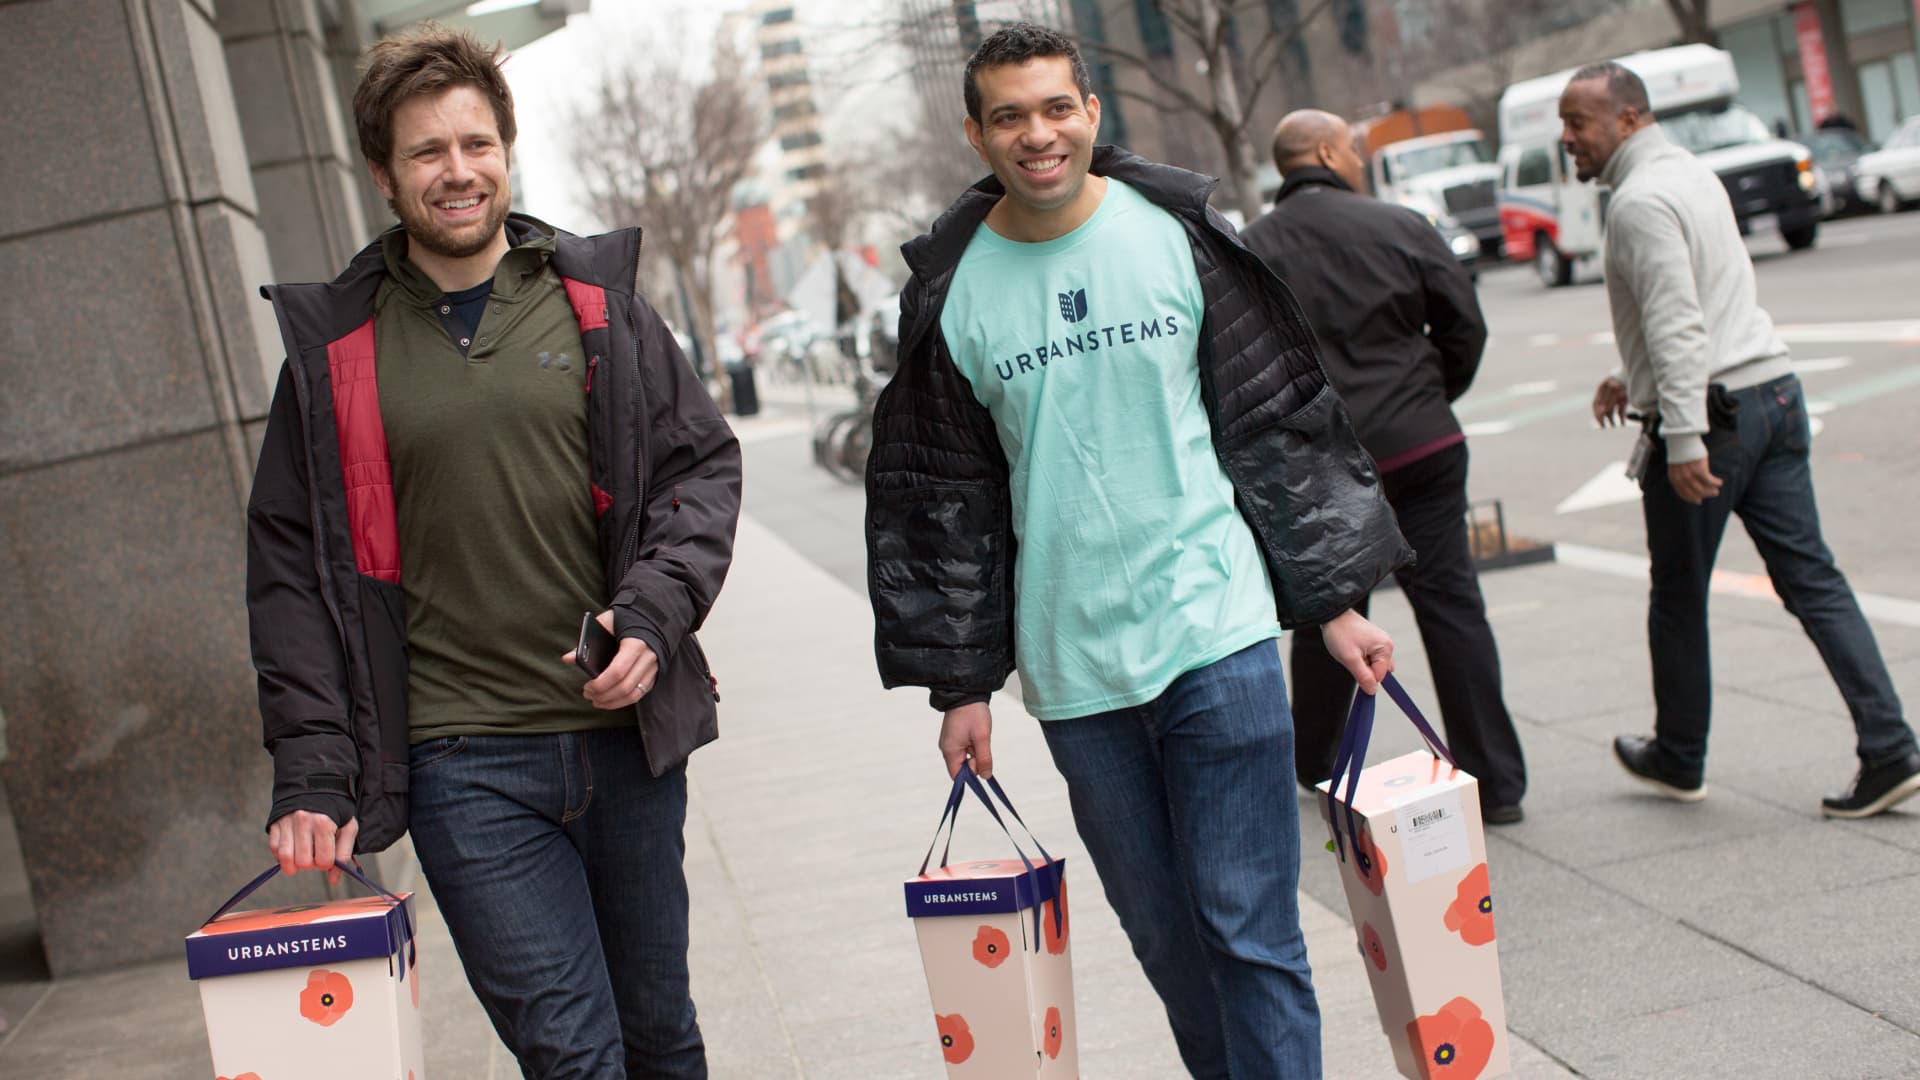 UrbanStems co-founders Jeff Sheely, left, and Ajay Kori, right, help deliver flowers on the company's busiest day of the year, Valentine's Day, in downtown Washington D.C., February 14, 2018.